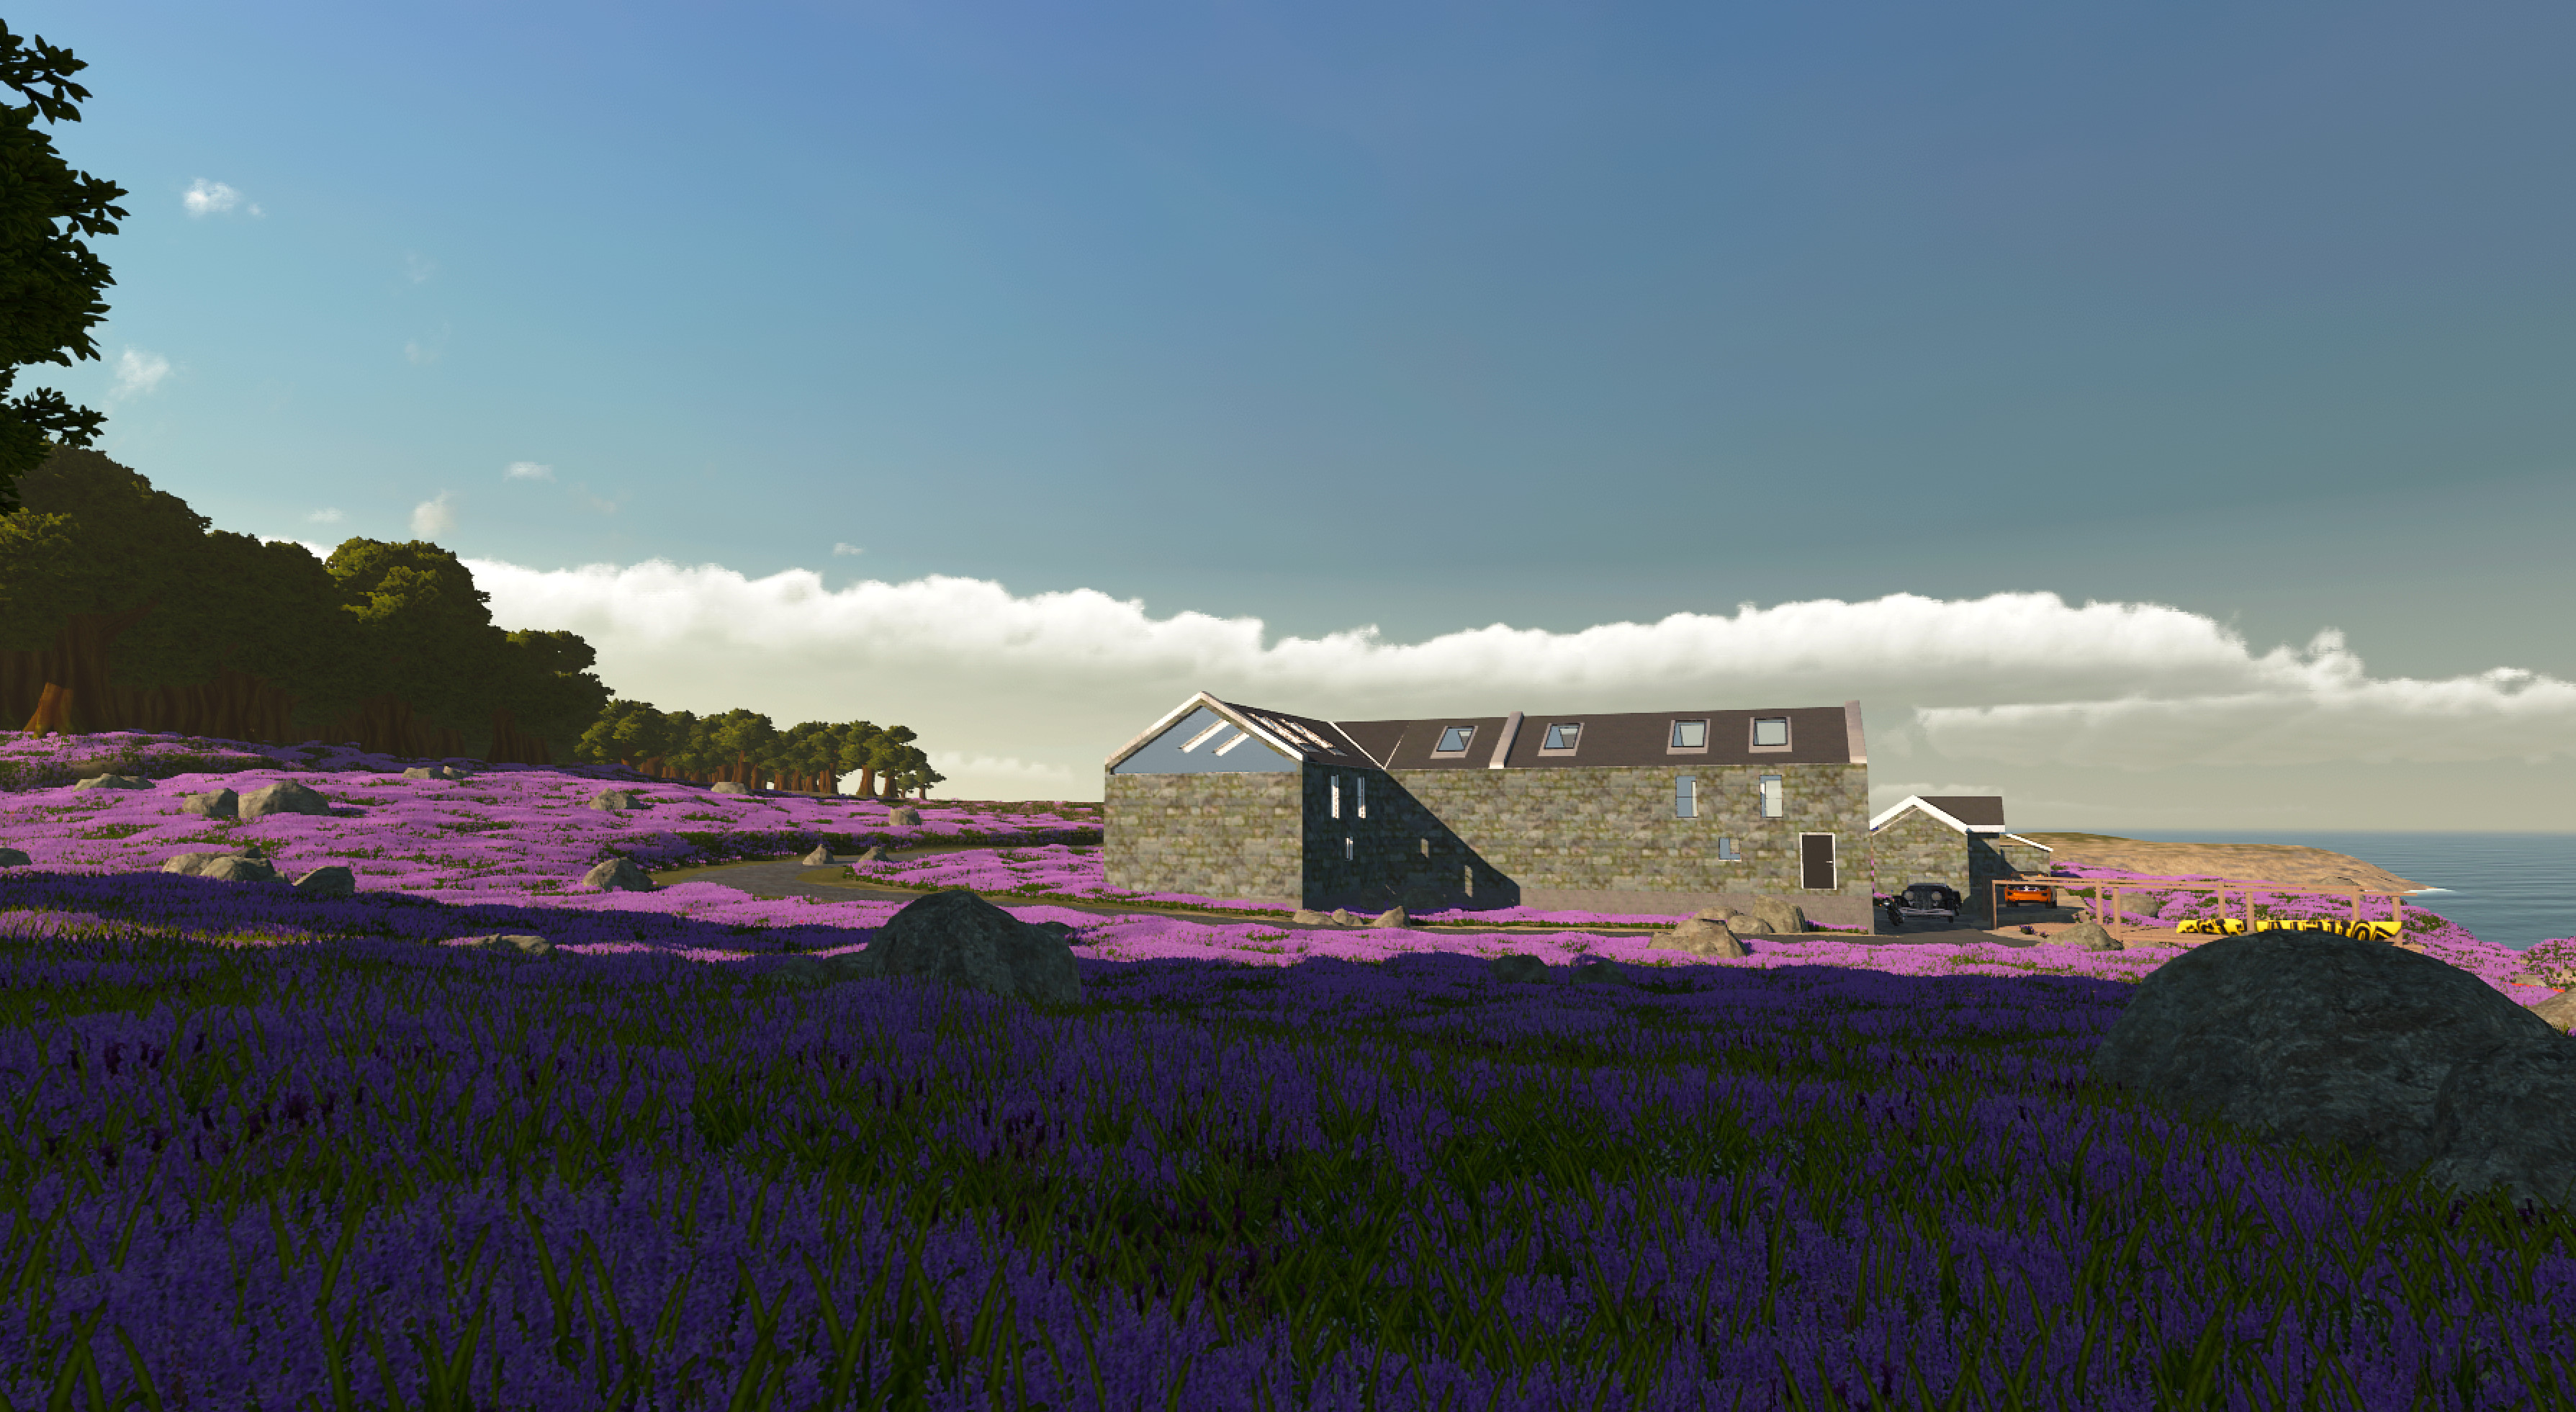 I've been working on a more specific to the Channel Islands environment setup - to be able to quickly go from an architectural model to in-situ with a nice feel. This image is an example of this prototype setup.